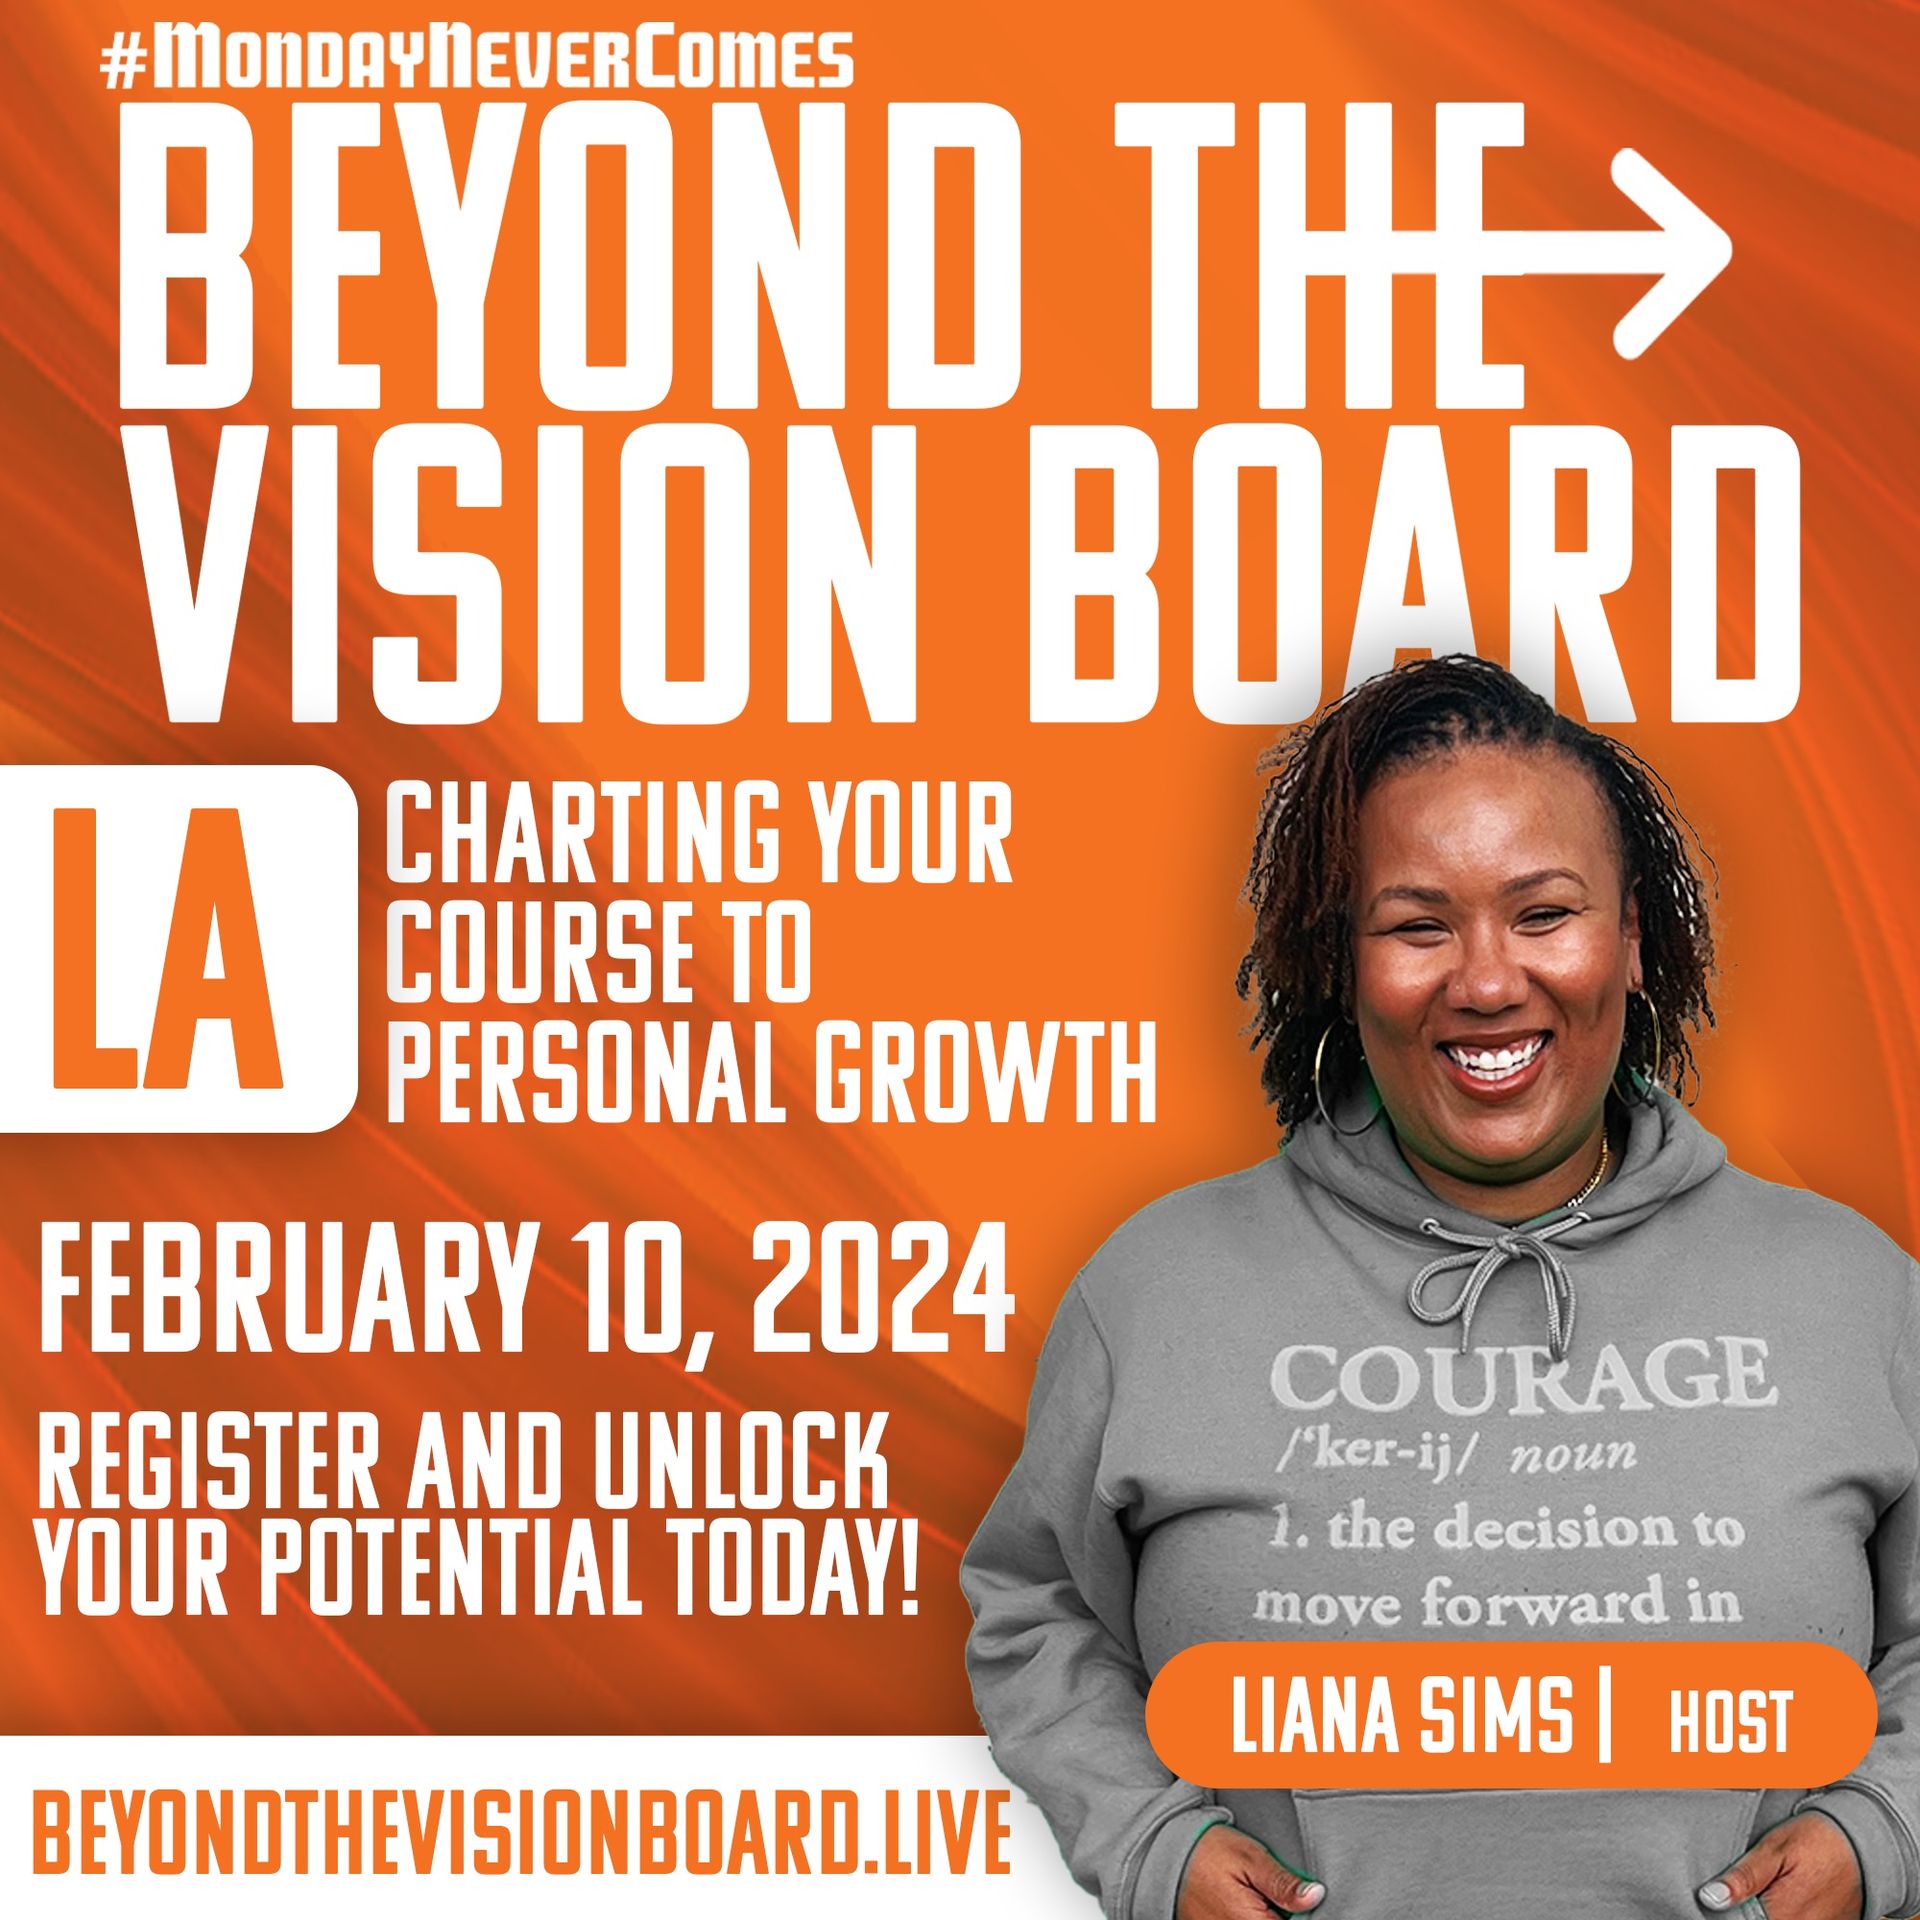 an advertisement for beyond the vision board shows a woman in a hoodie